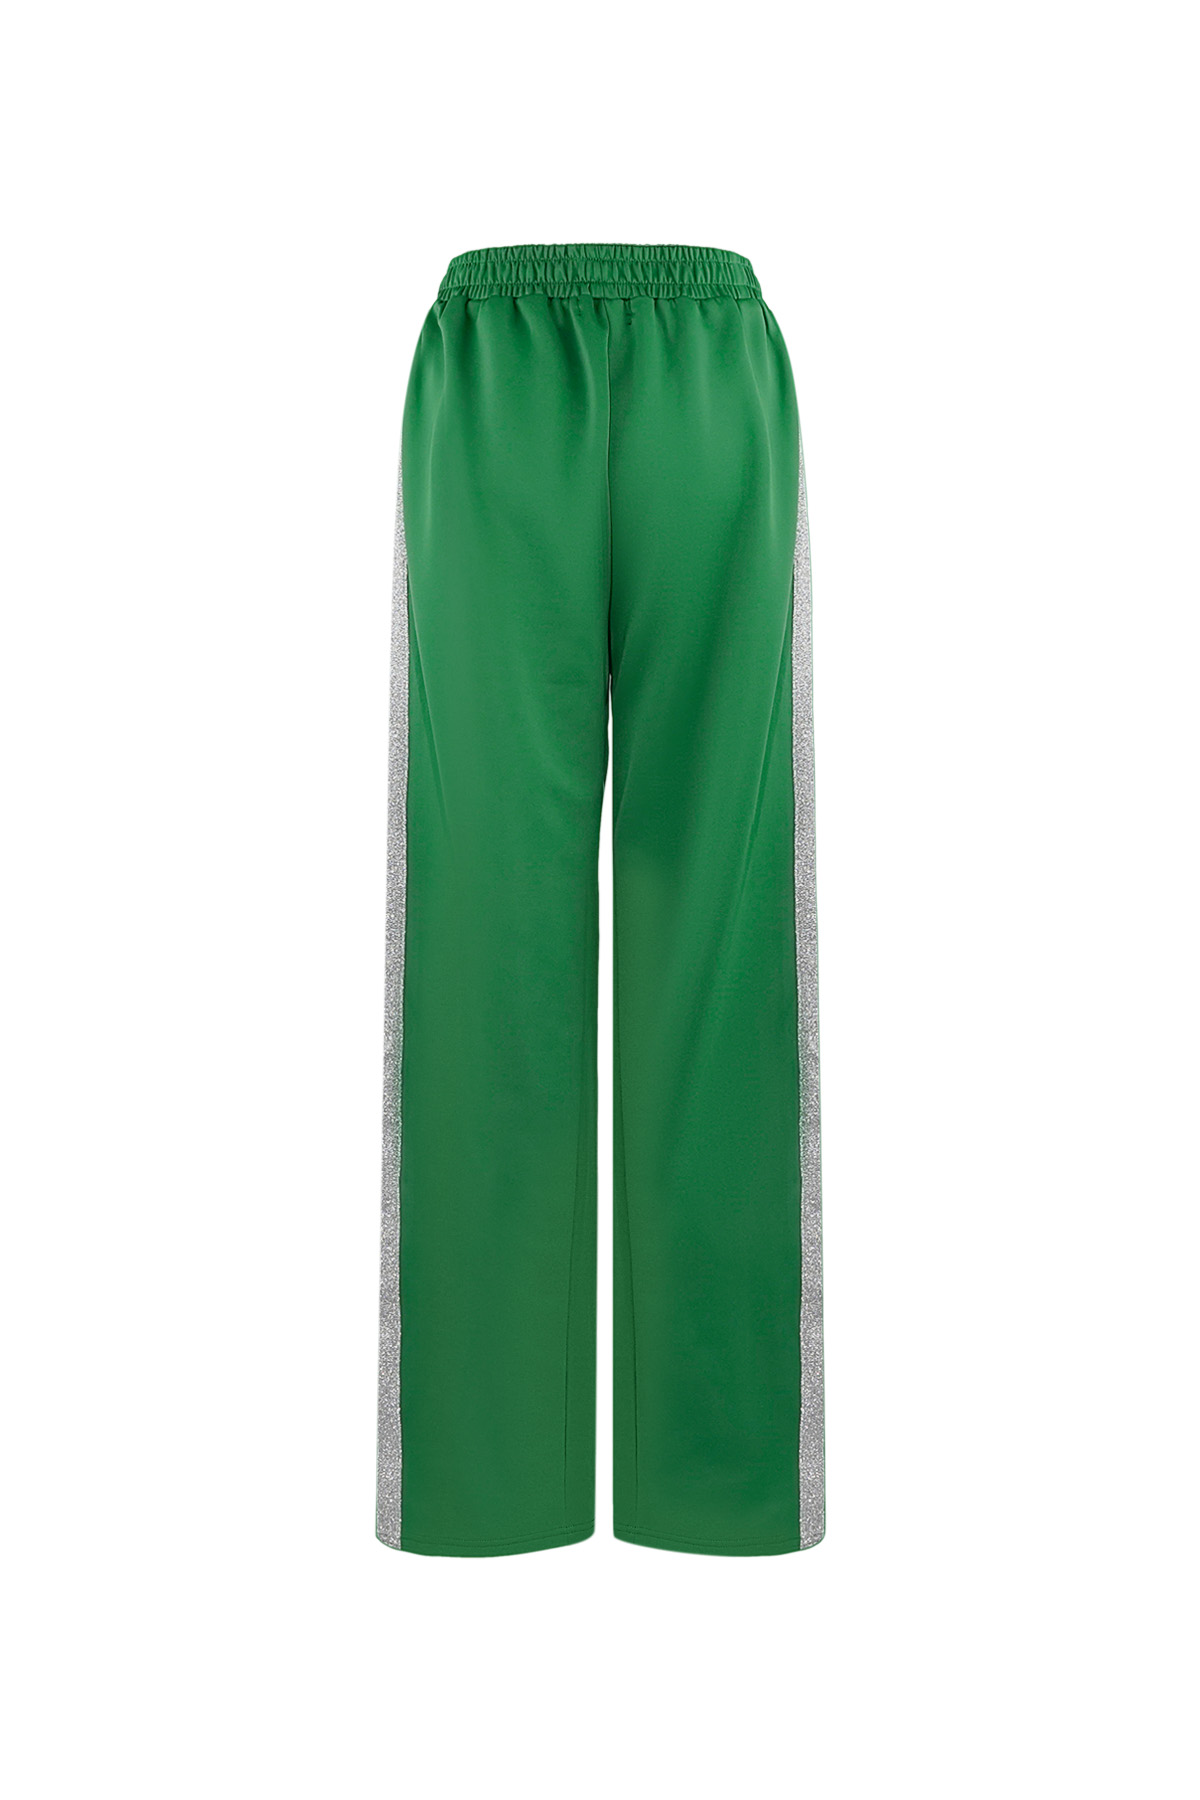 Striped must have pants - green S Picture12